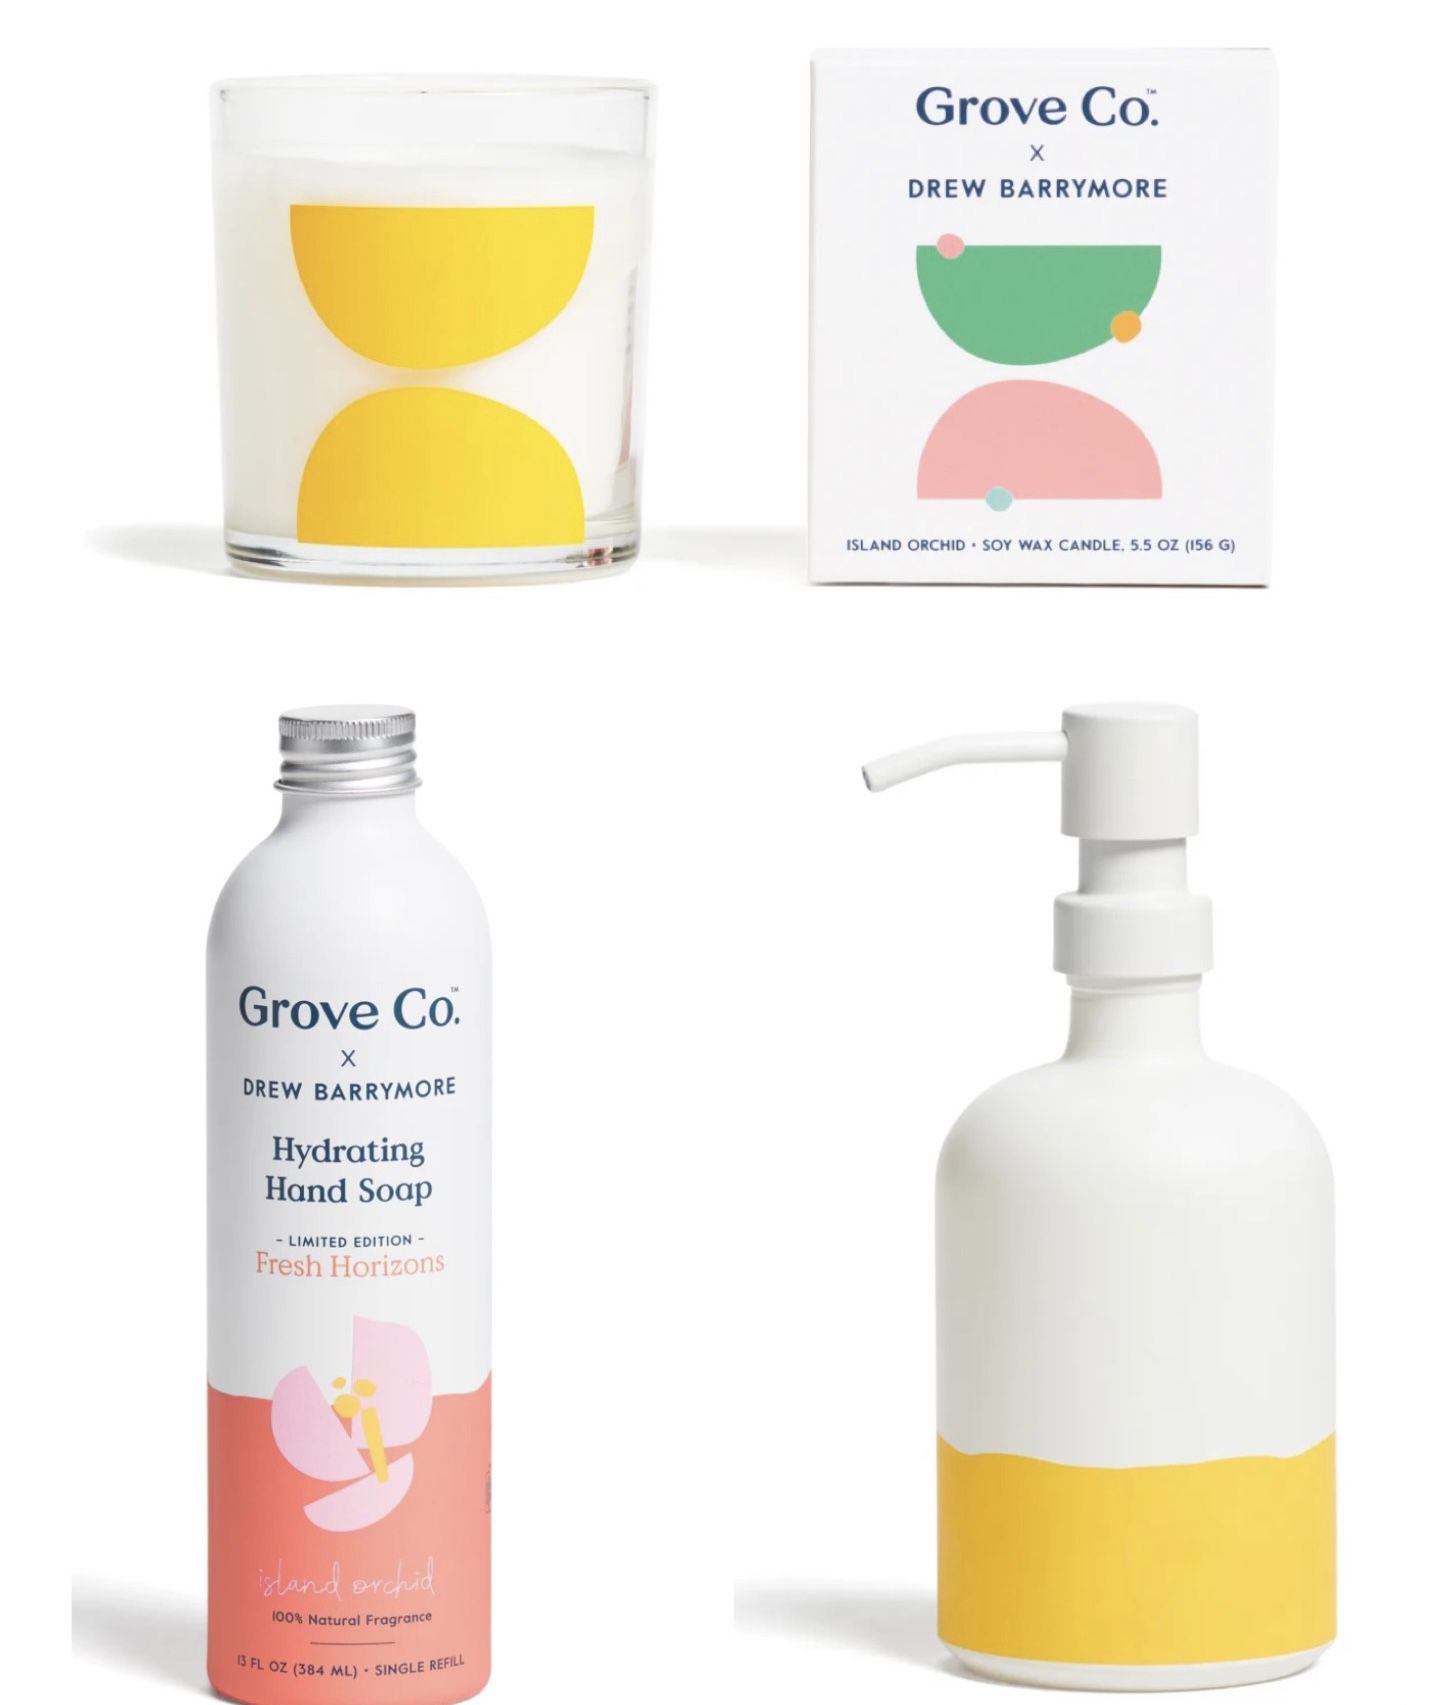 Grove Collaborative x Drew Barrymore-Island Orchid Candle, Hand Soap, and Glass Hand Soap Dispenser Bundle